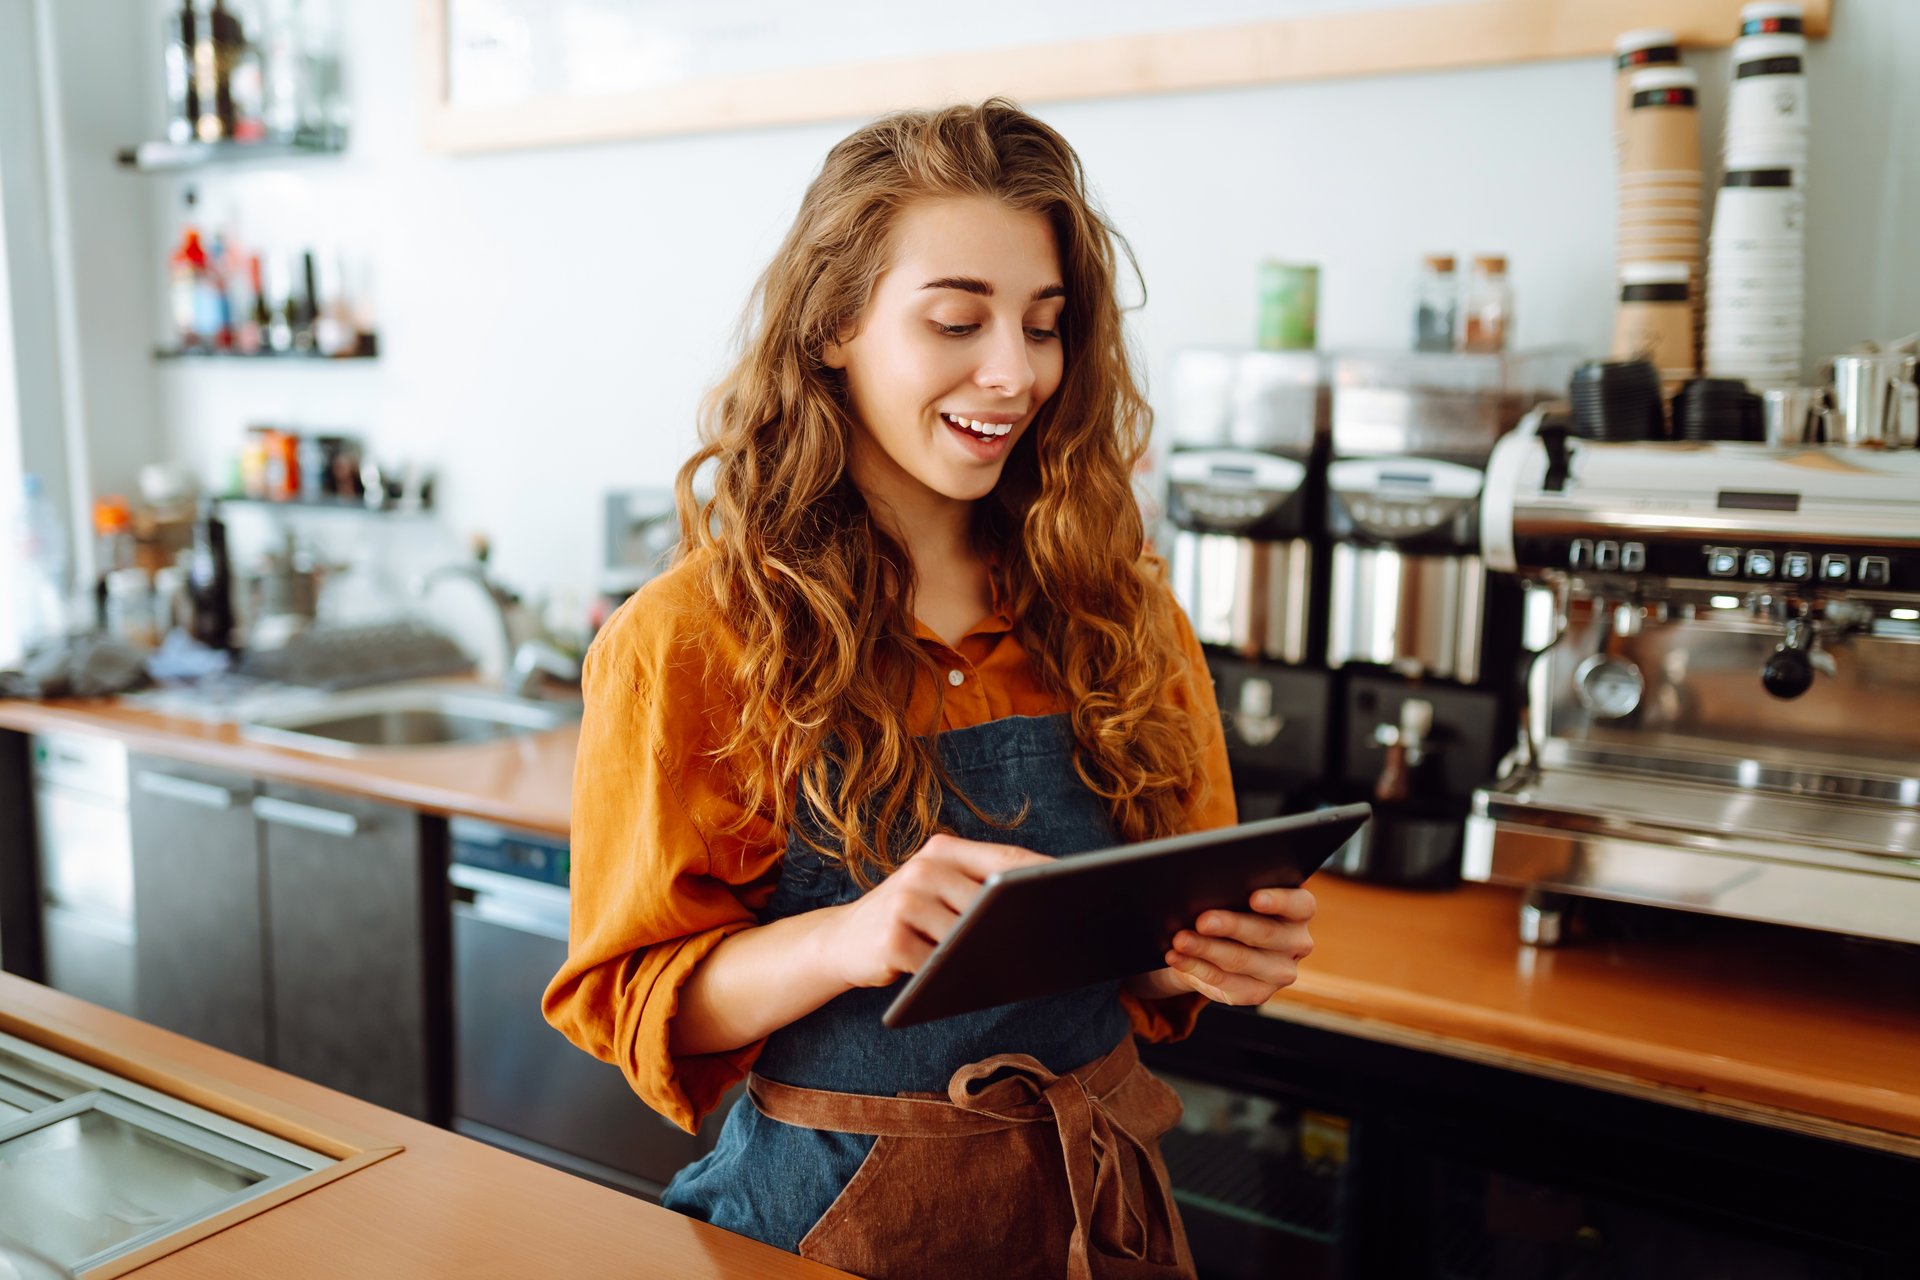 Bistro employee standing by coffee machine using digital procurement technology on a tablet